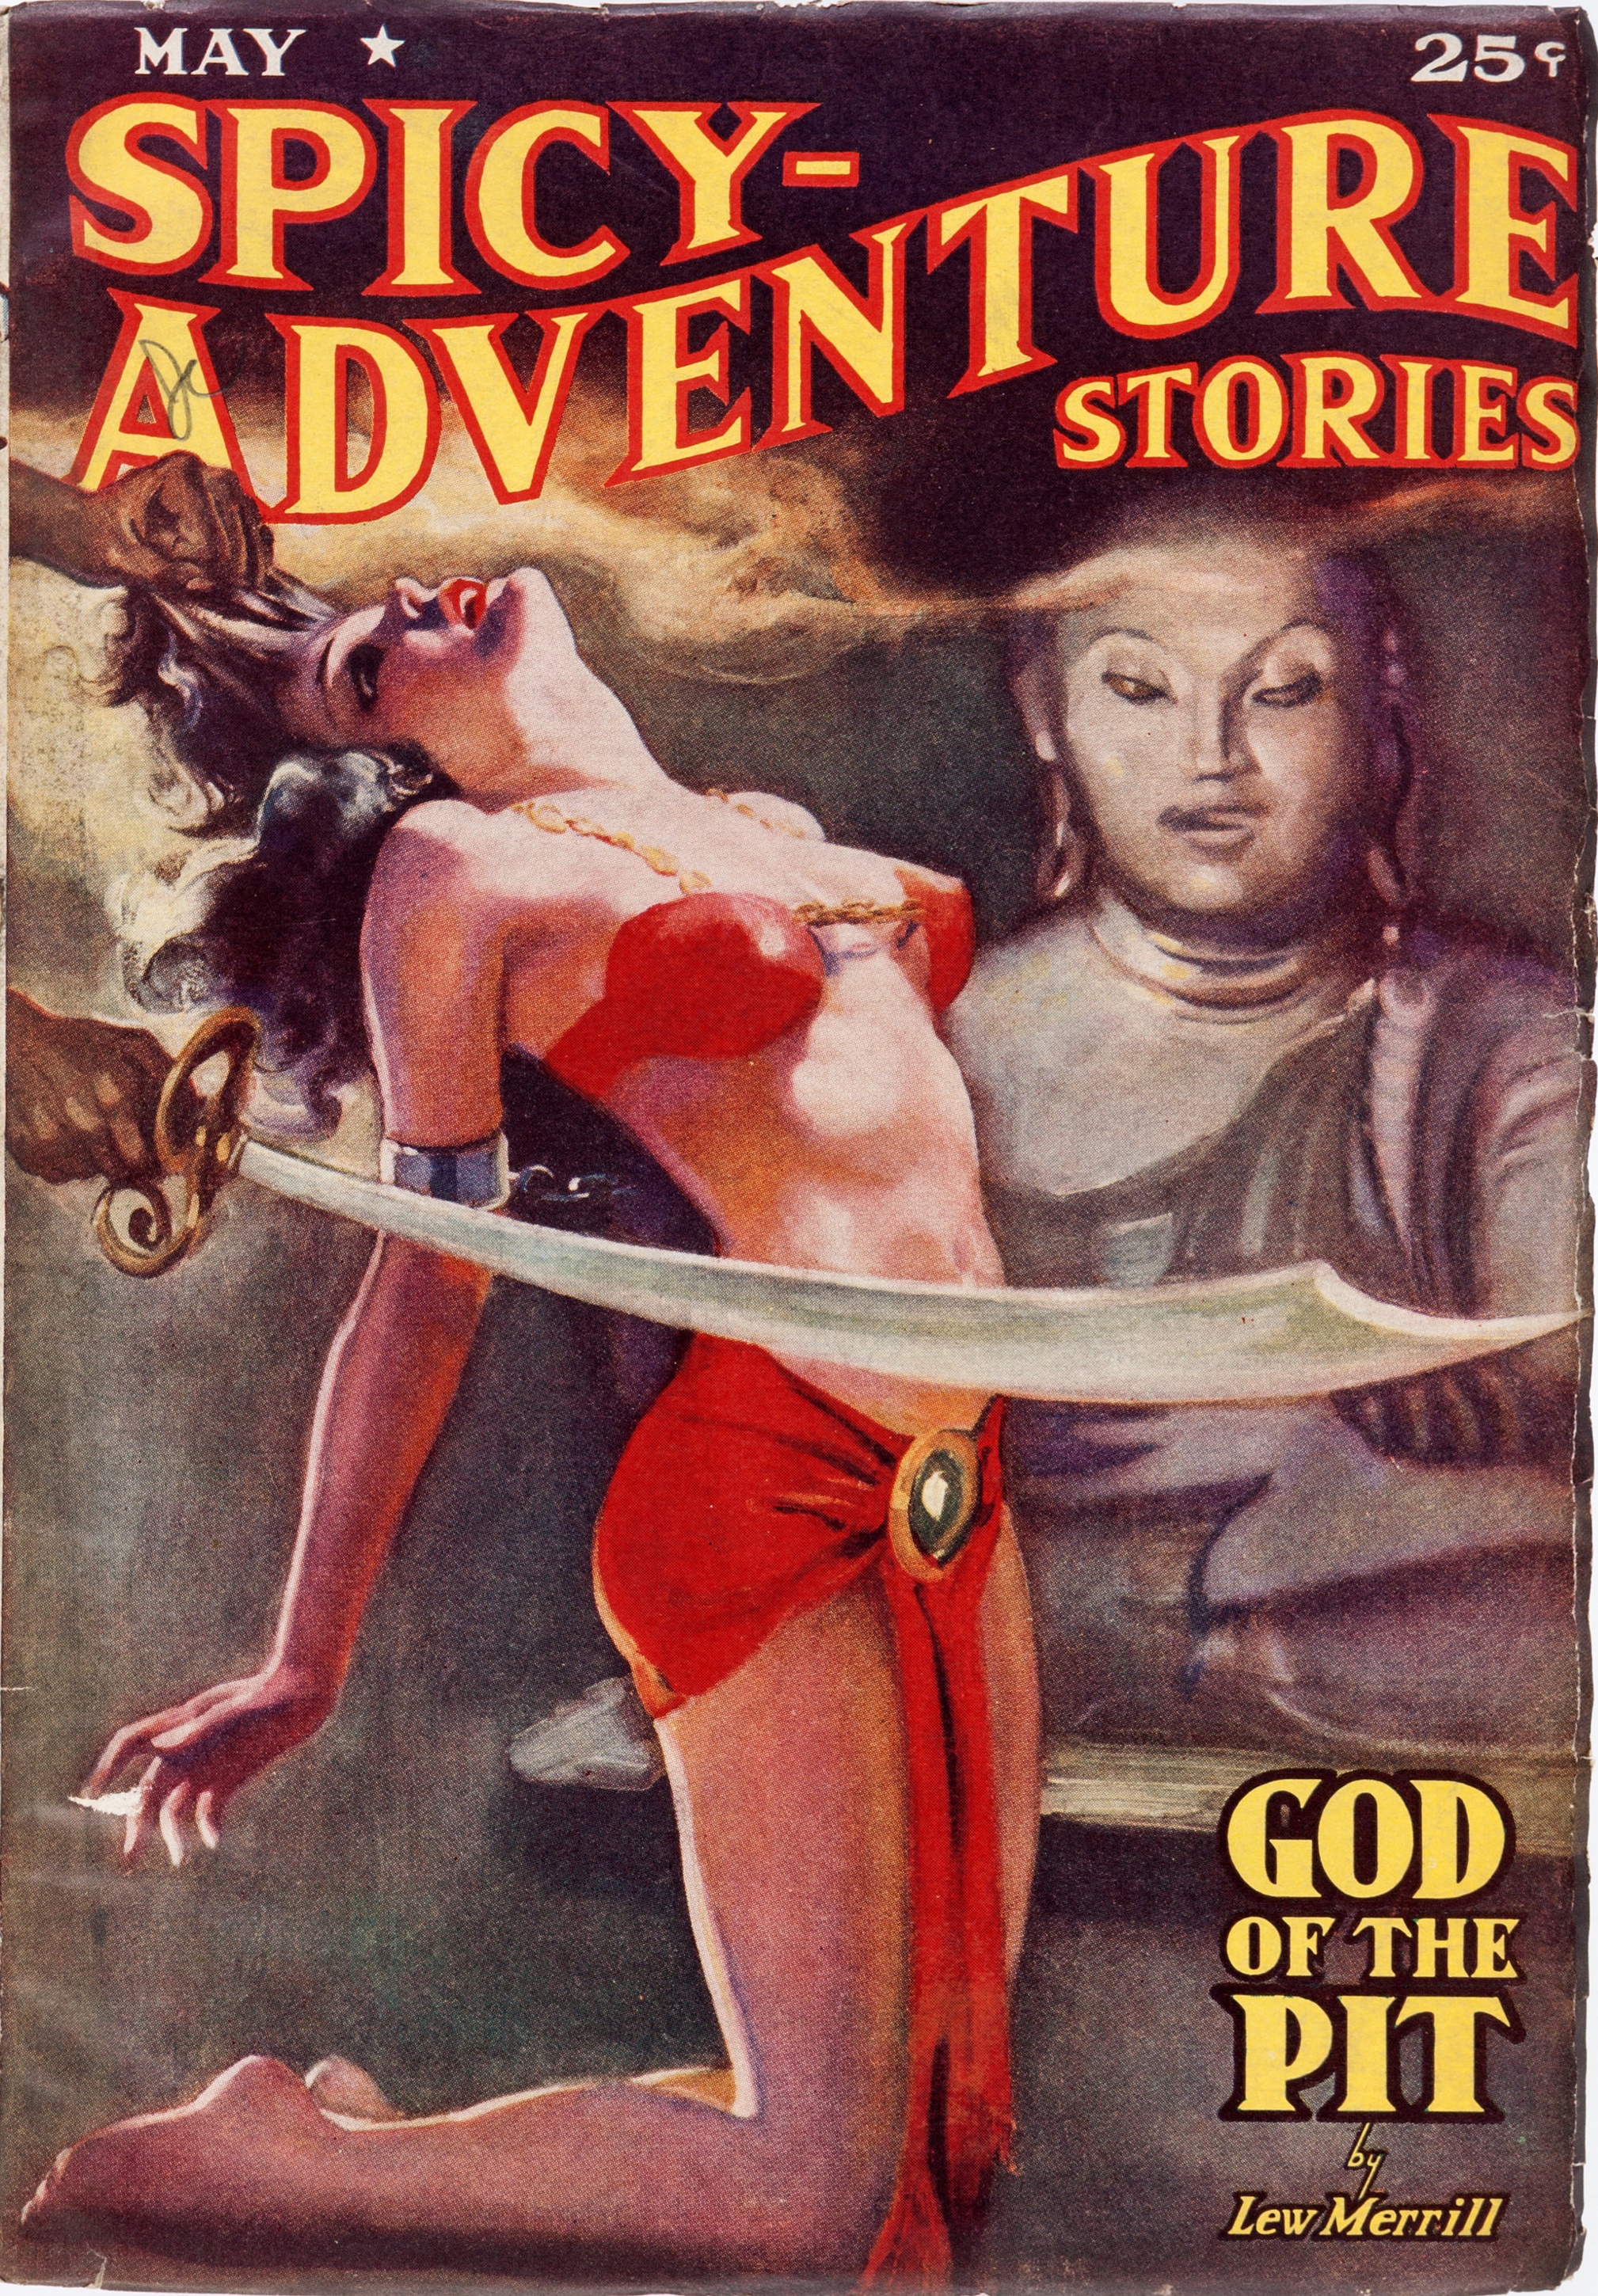 https://pulpcovers.com/wp-content/uploads/2019/05/Spicy-Adventure-Stories-May-1938.jpg